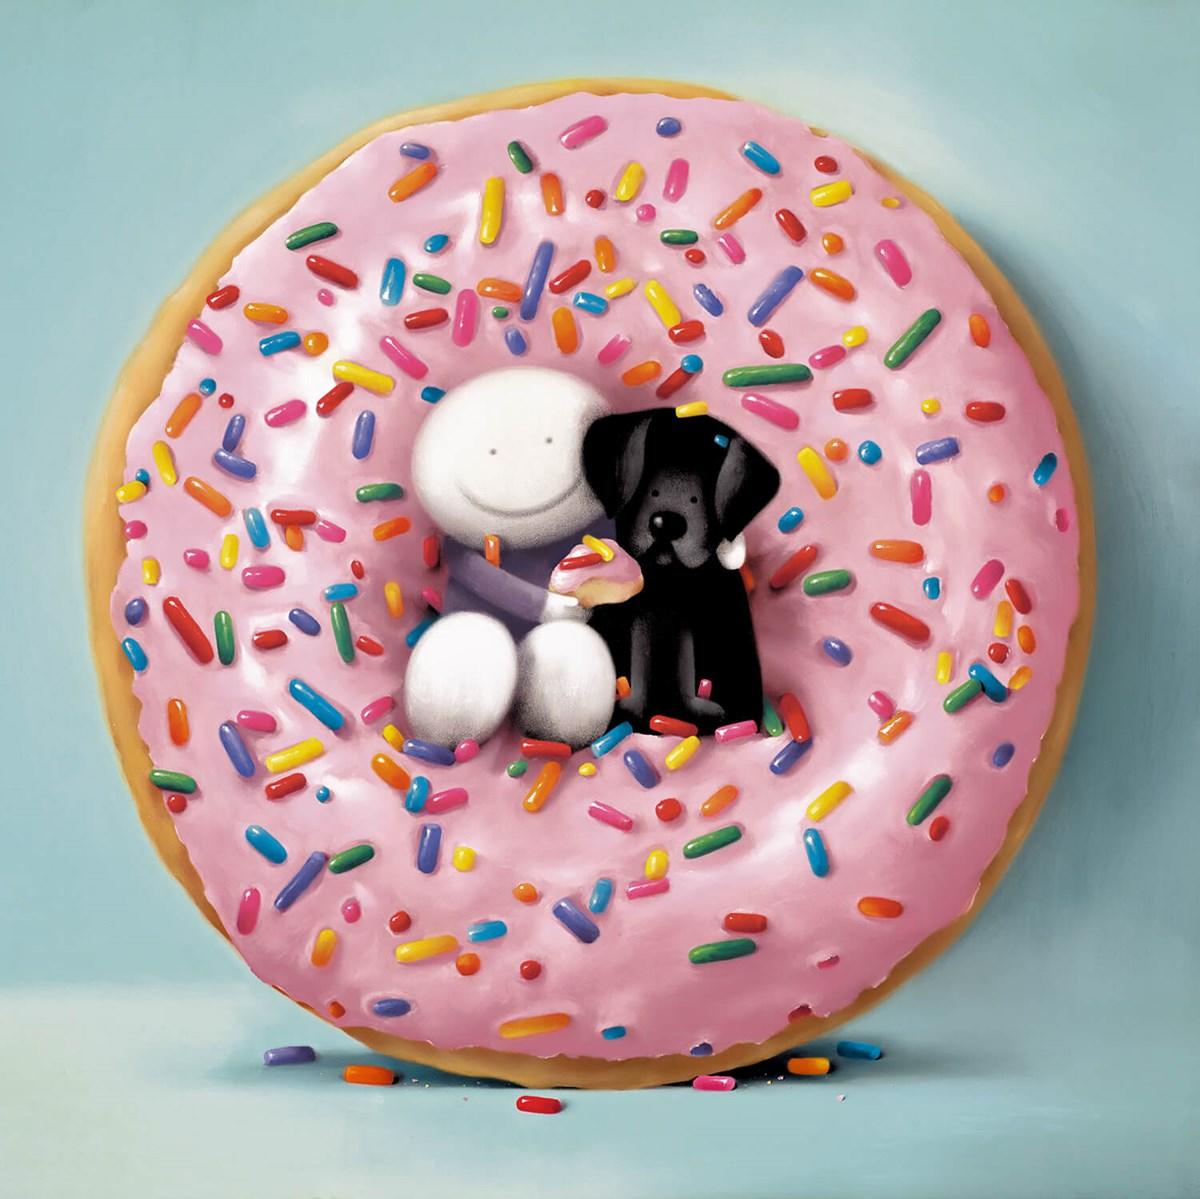 I Love You Hundreds and Thousands by Doug Hyde - art print ZHYD738